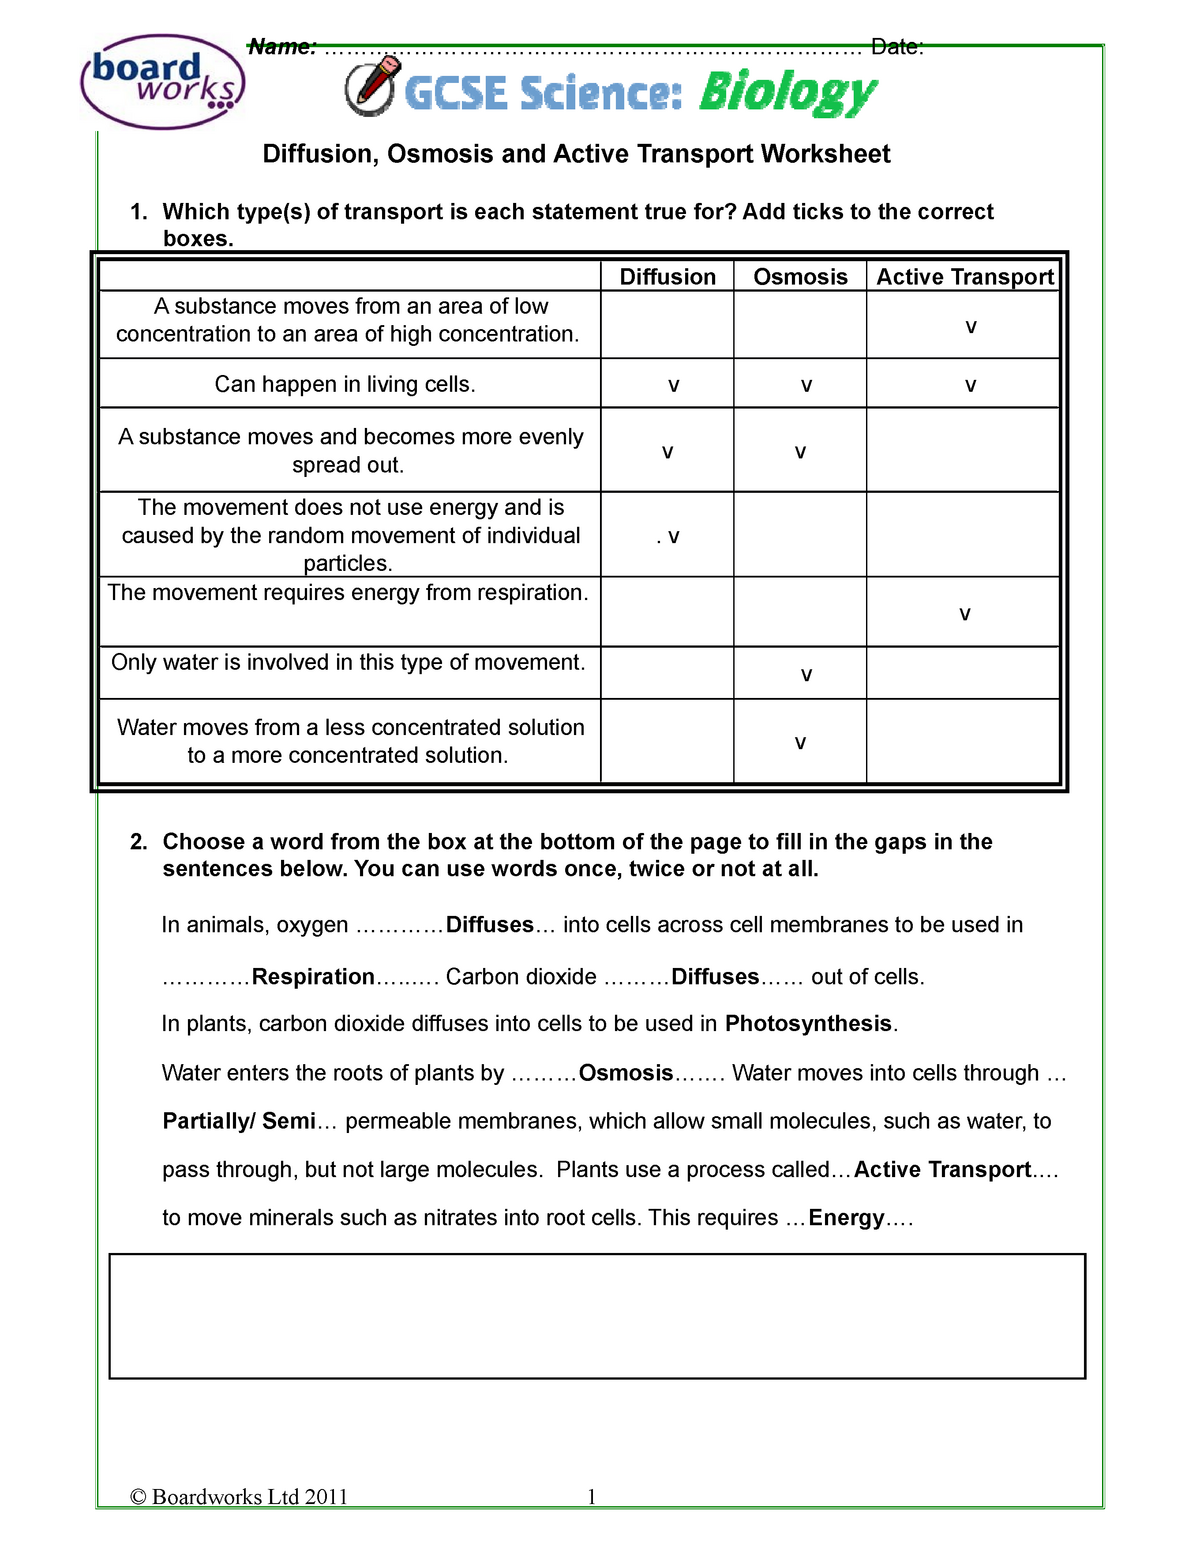 Diffusion Osmosis and Active Transport Worksheet F21 - BP 21 For Transport In Cells Worksheet